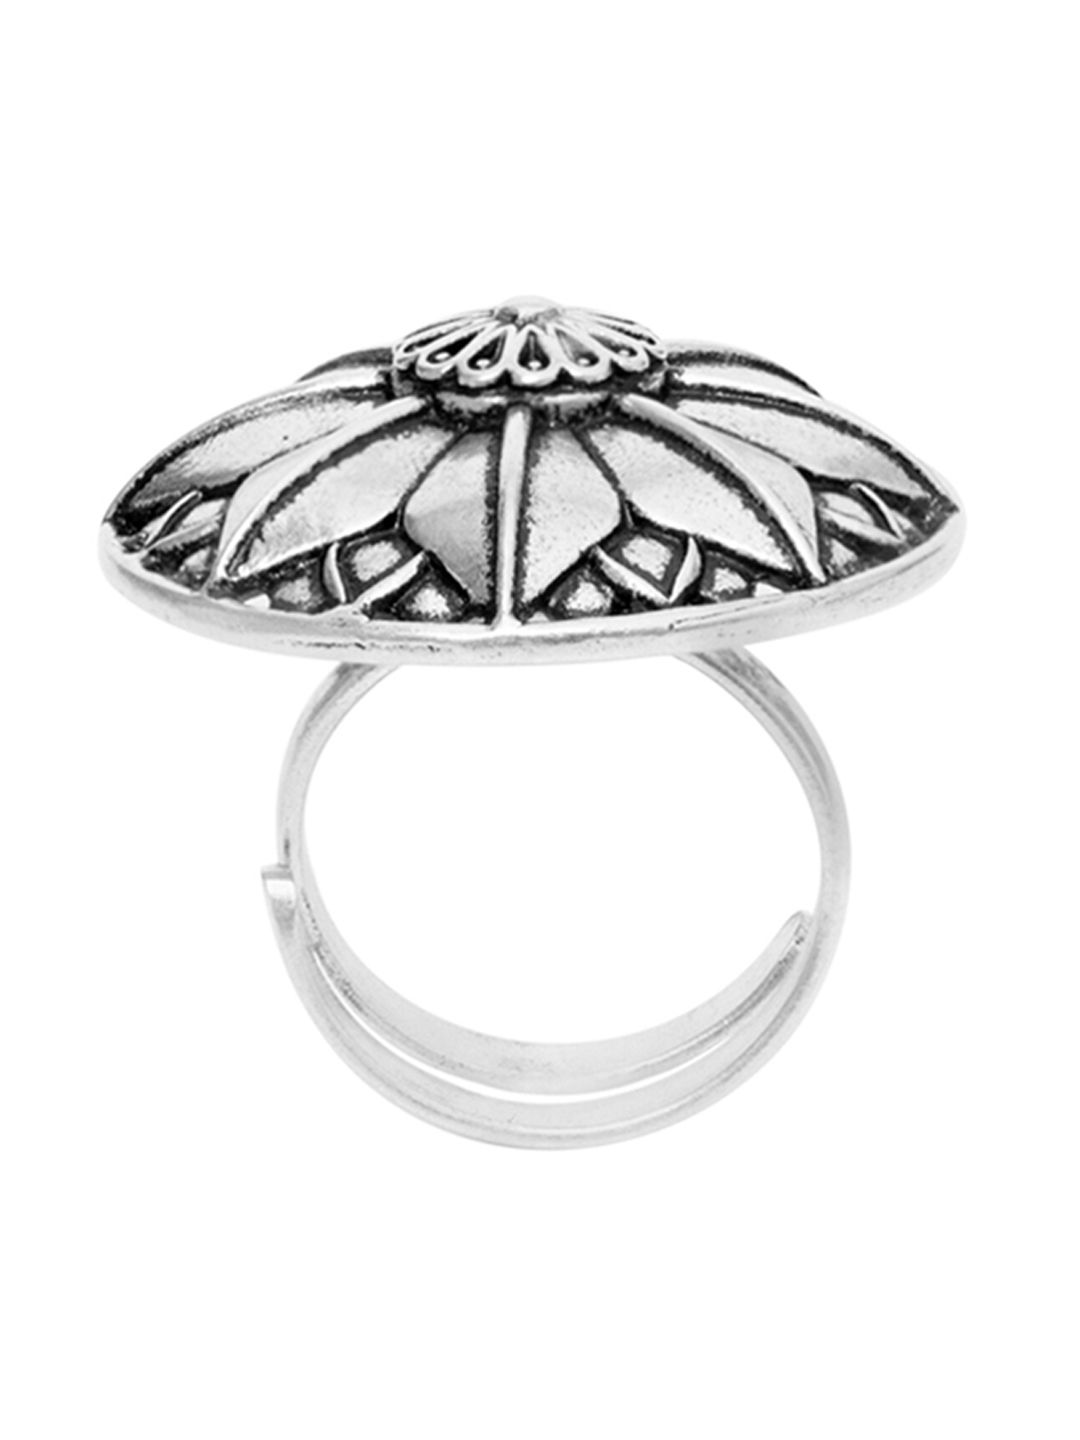 Studio Voylla Oxidised Silver-Plated Flower Ring Price in India